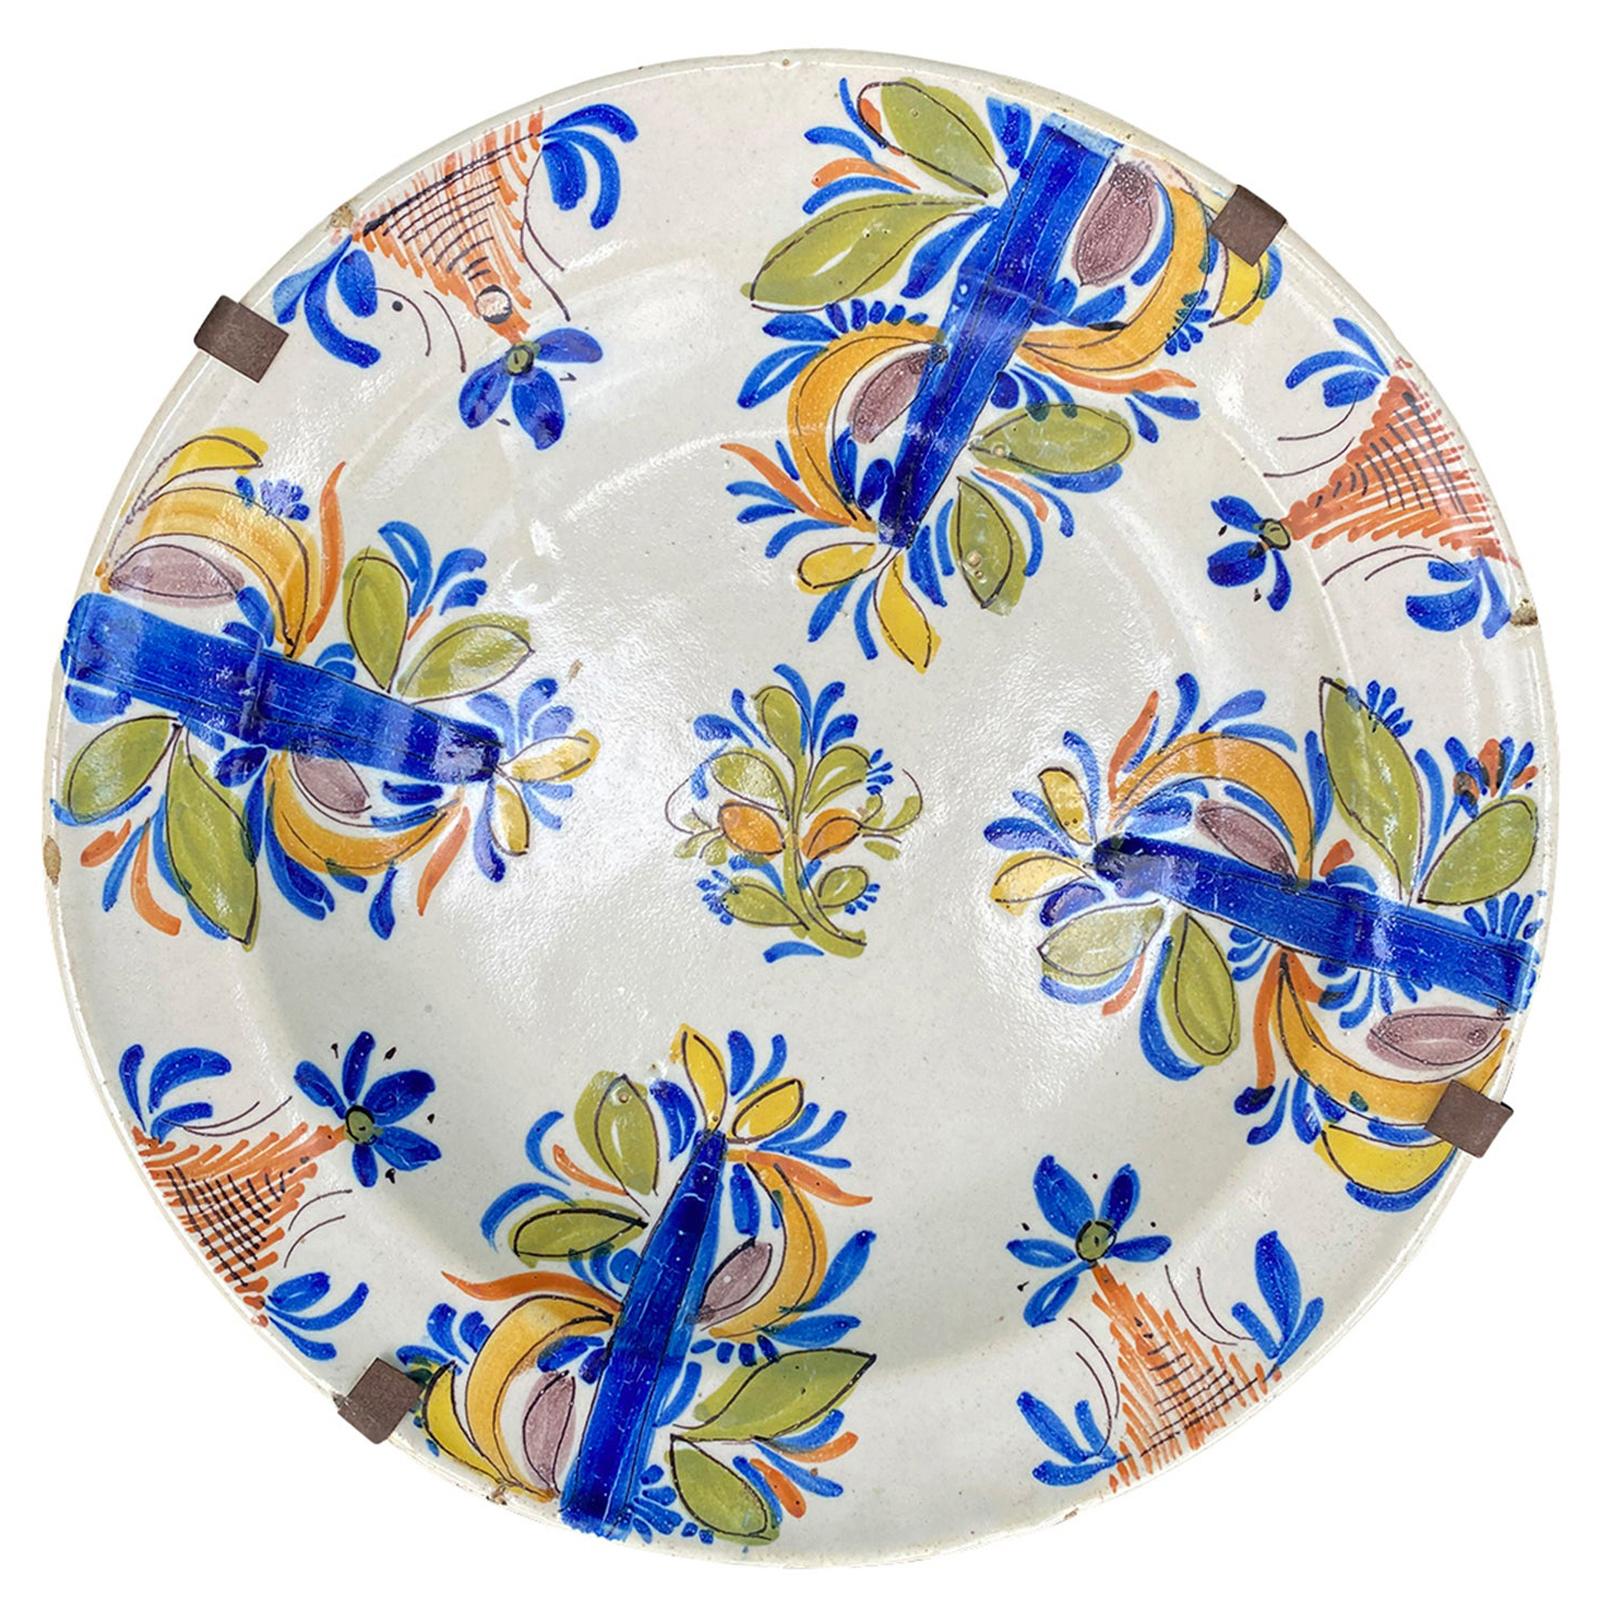 18th Century Delft Faience Polychrome Charger with Plate Hanger, Signed V.M.D. For Sale